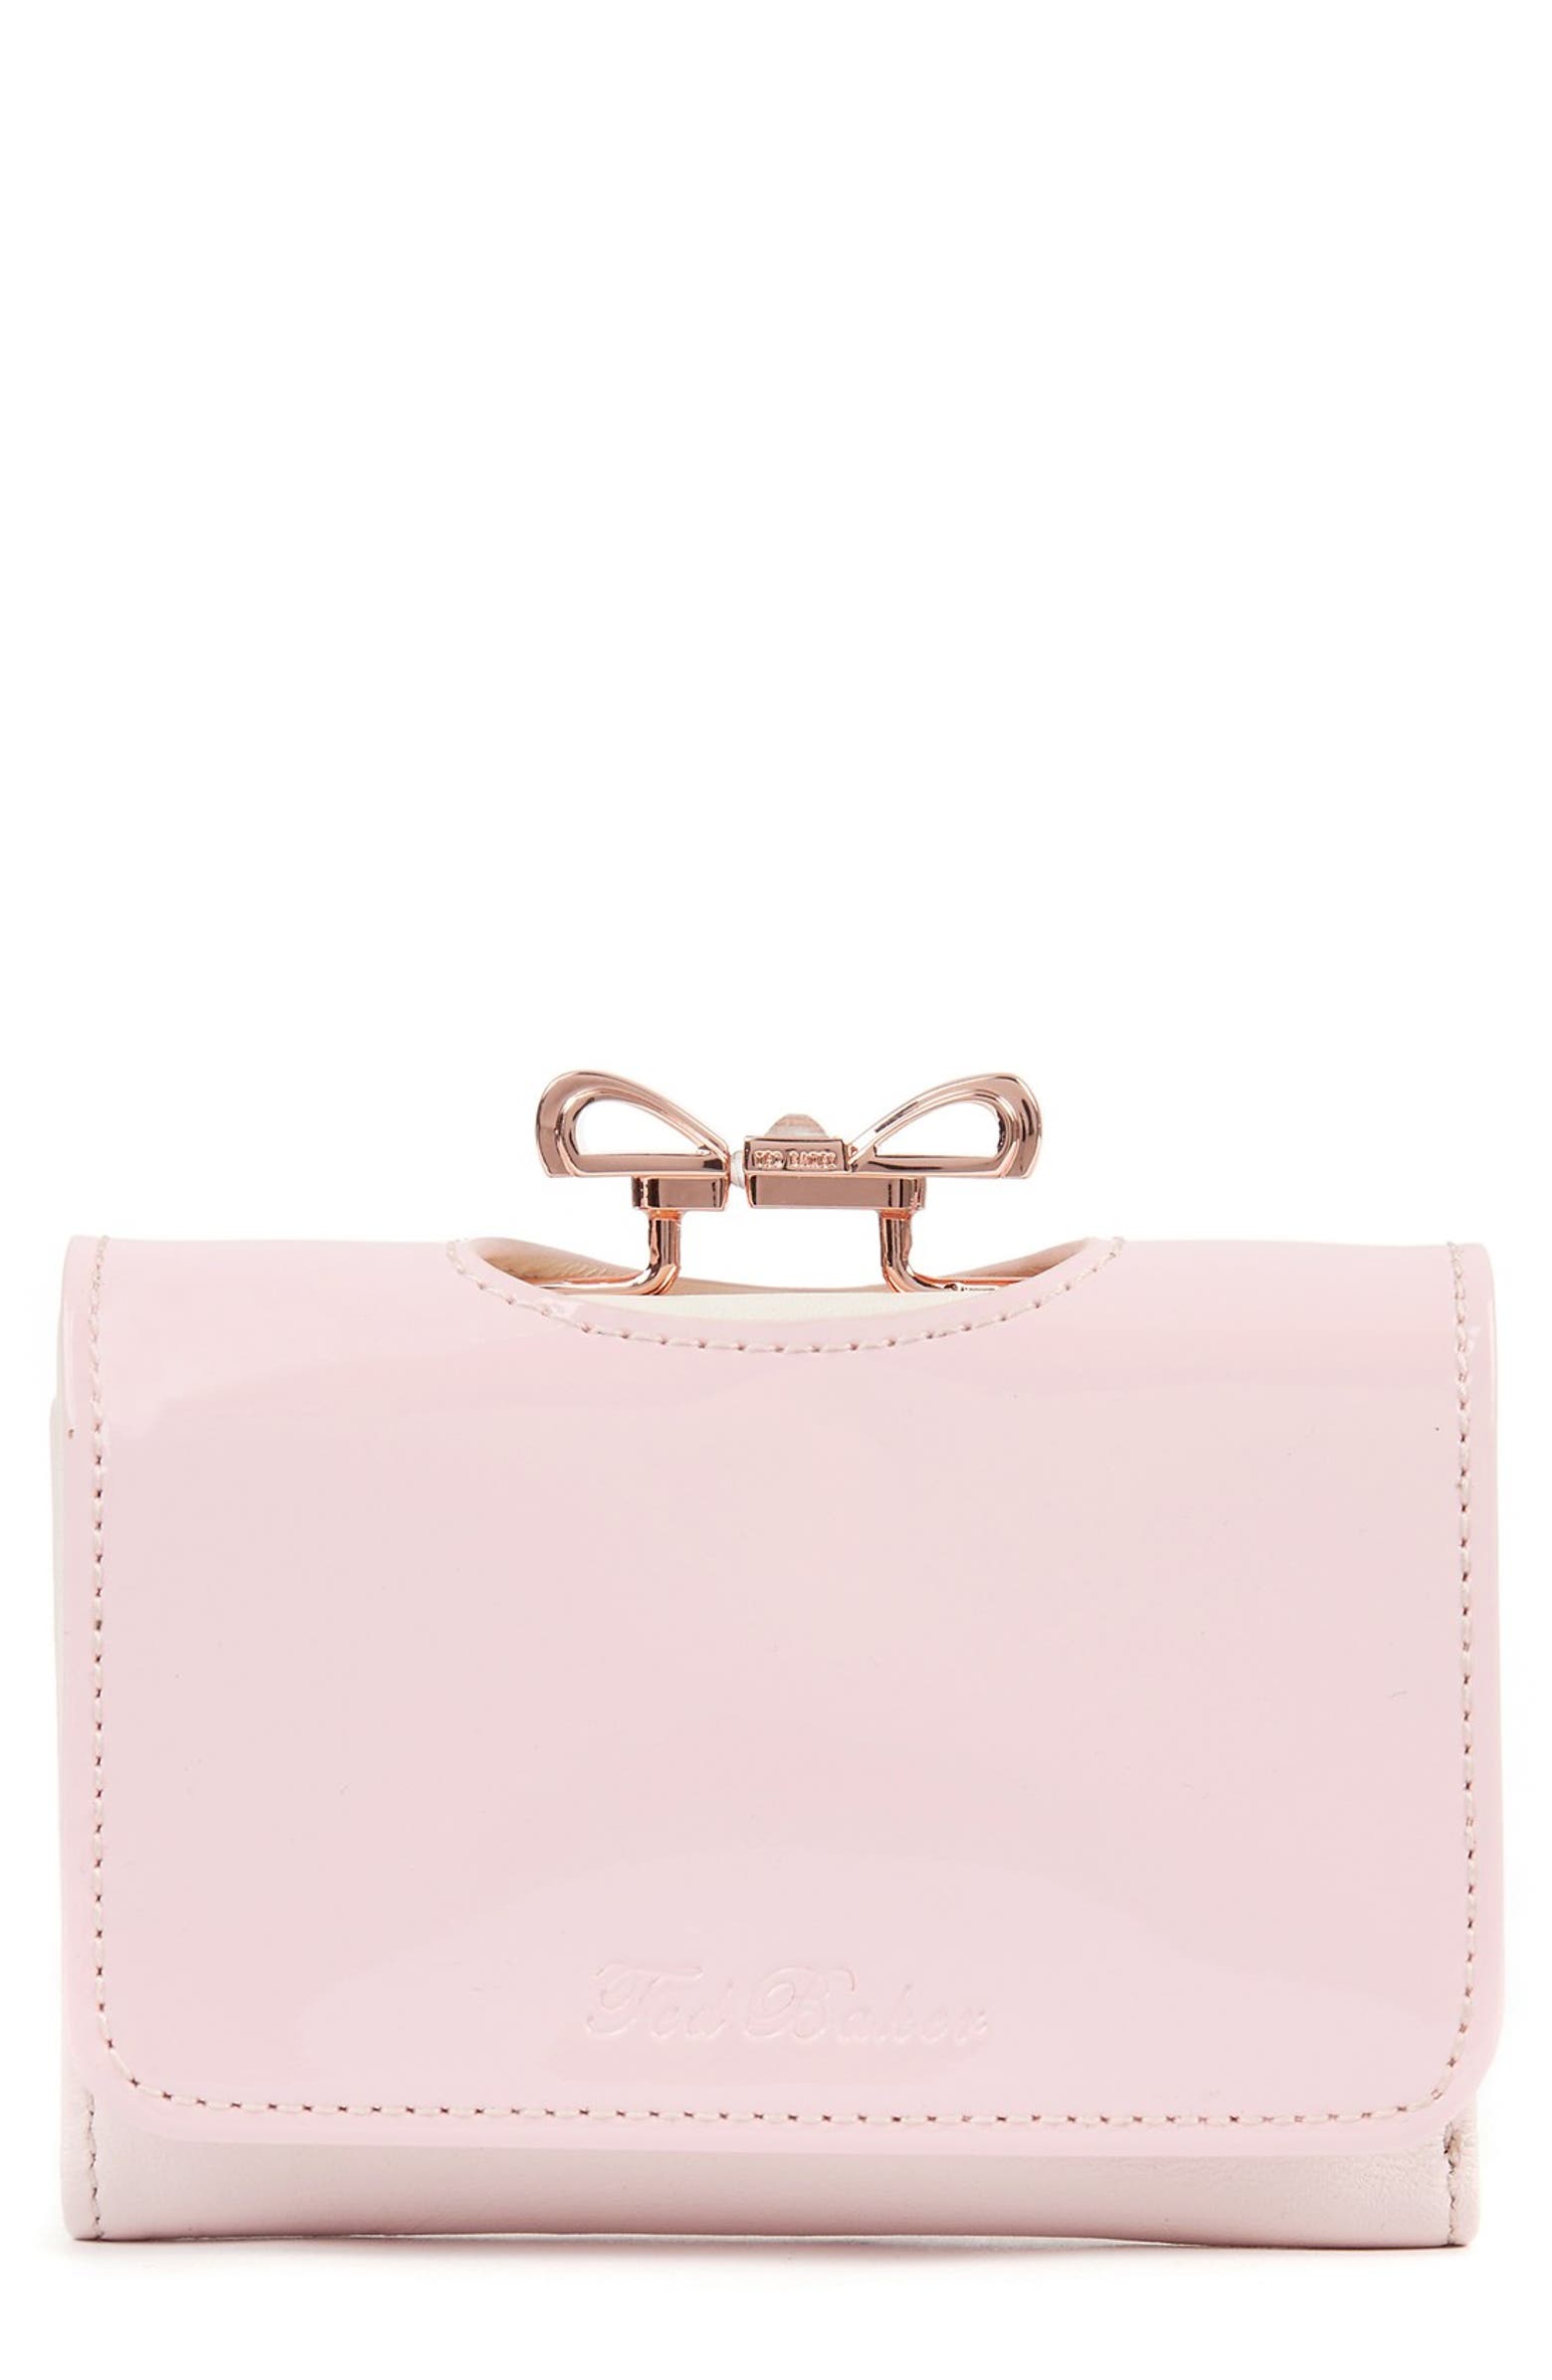 Ted Baker London 'Small Colorblock' Leather Wallet | Nordstrom